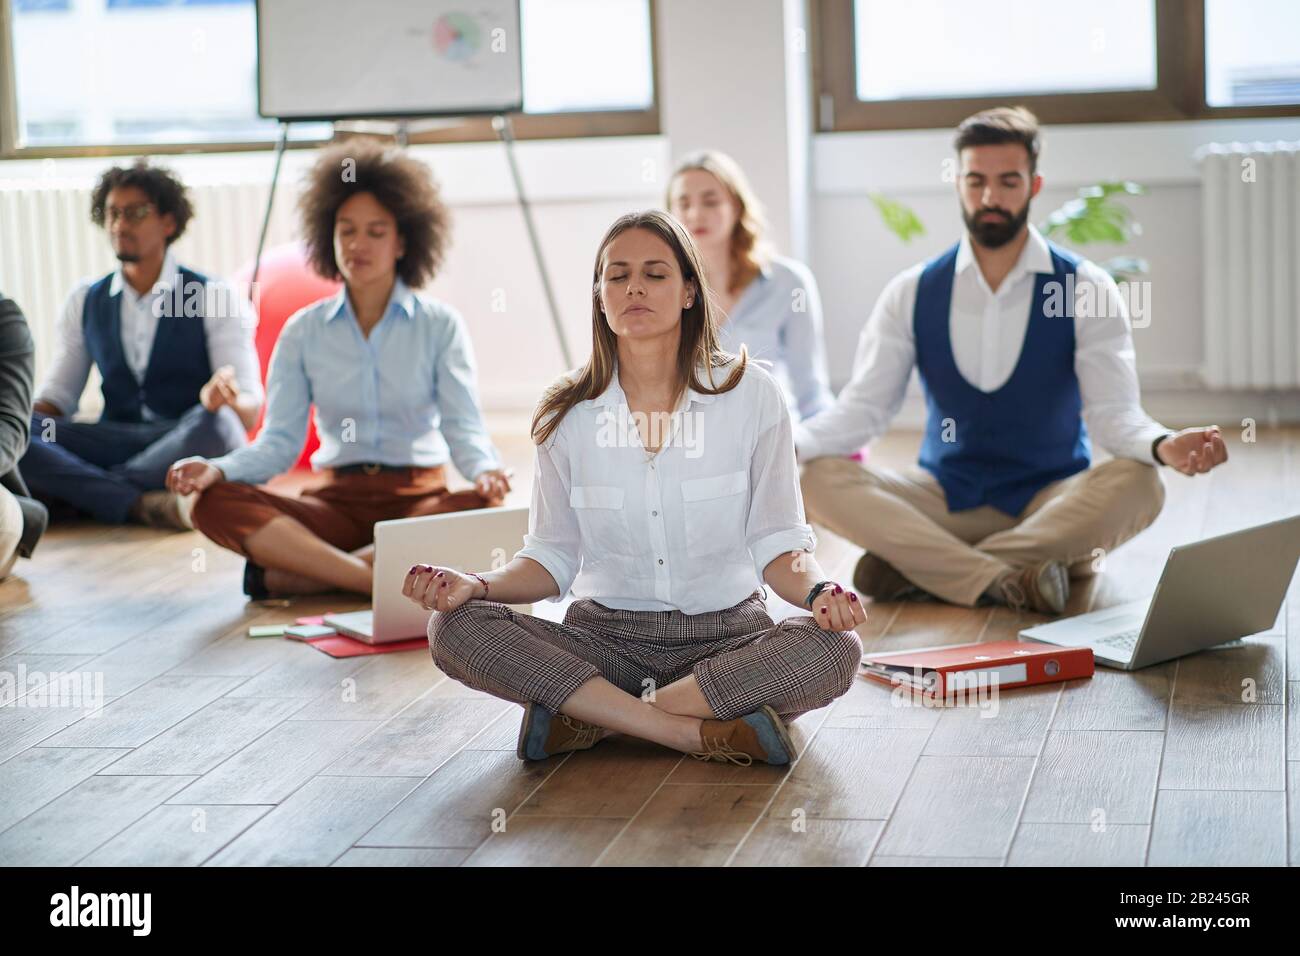 Businesswoman meditating at work.group of business coworkers meditating together at work. Stock Photo